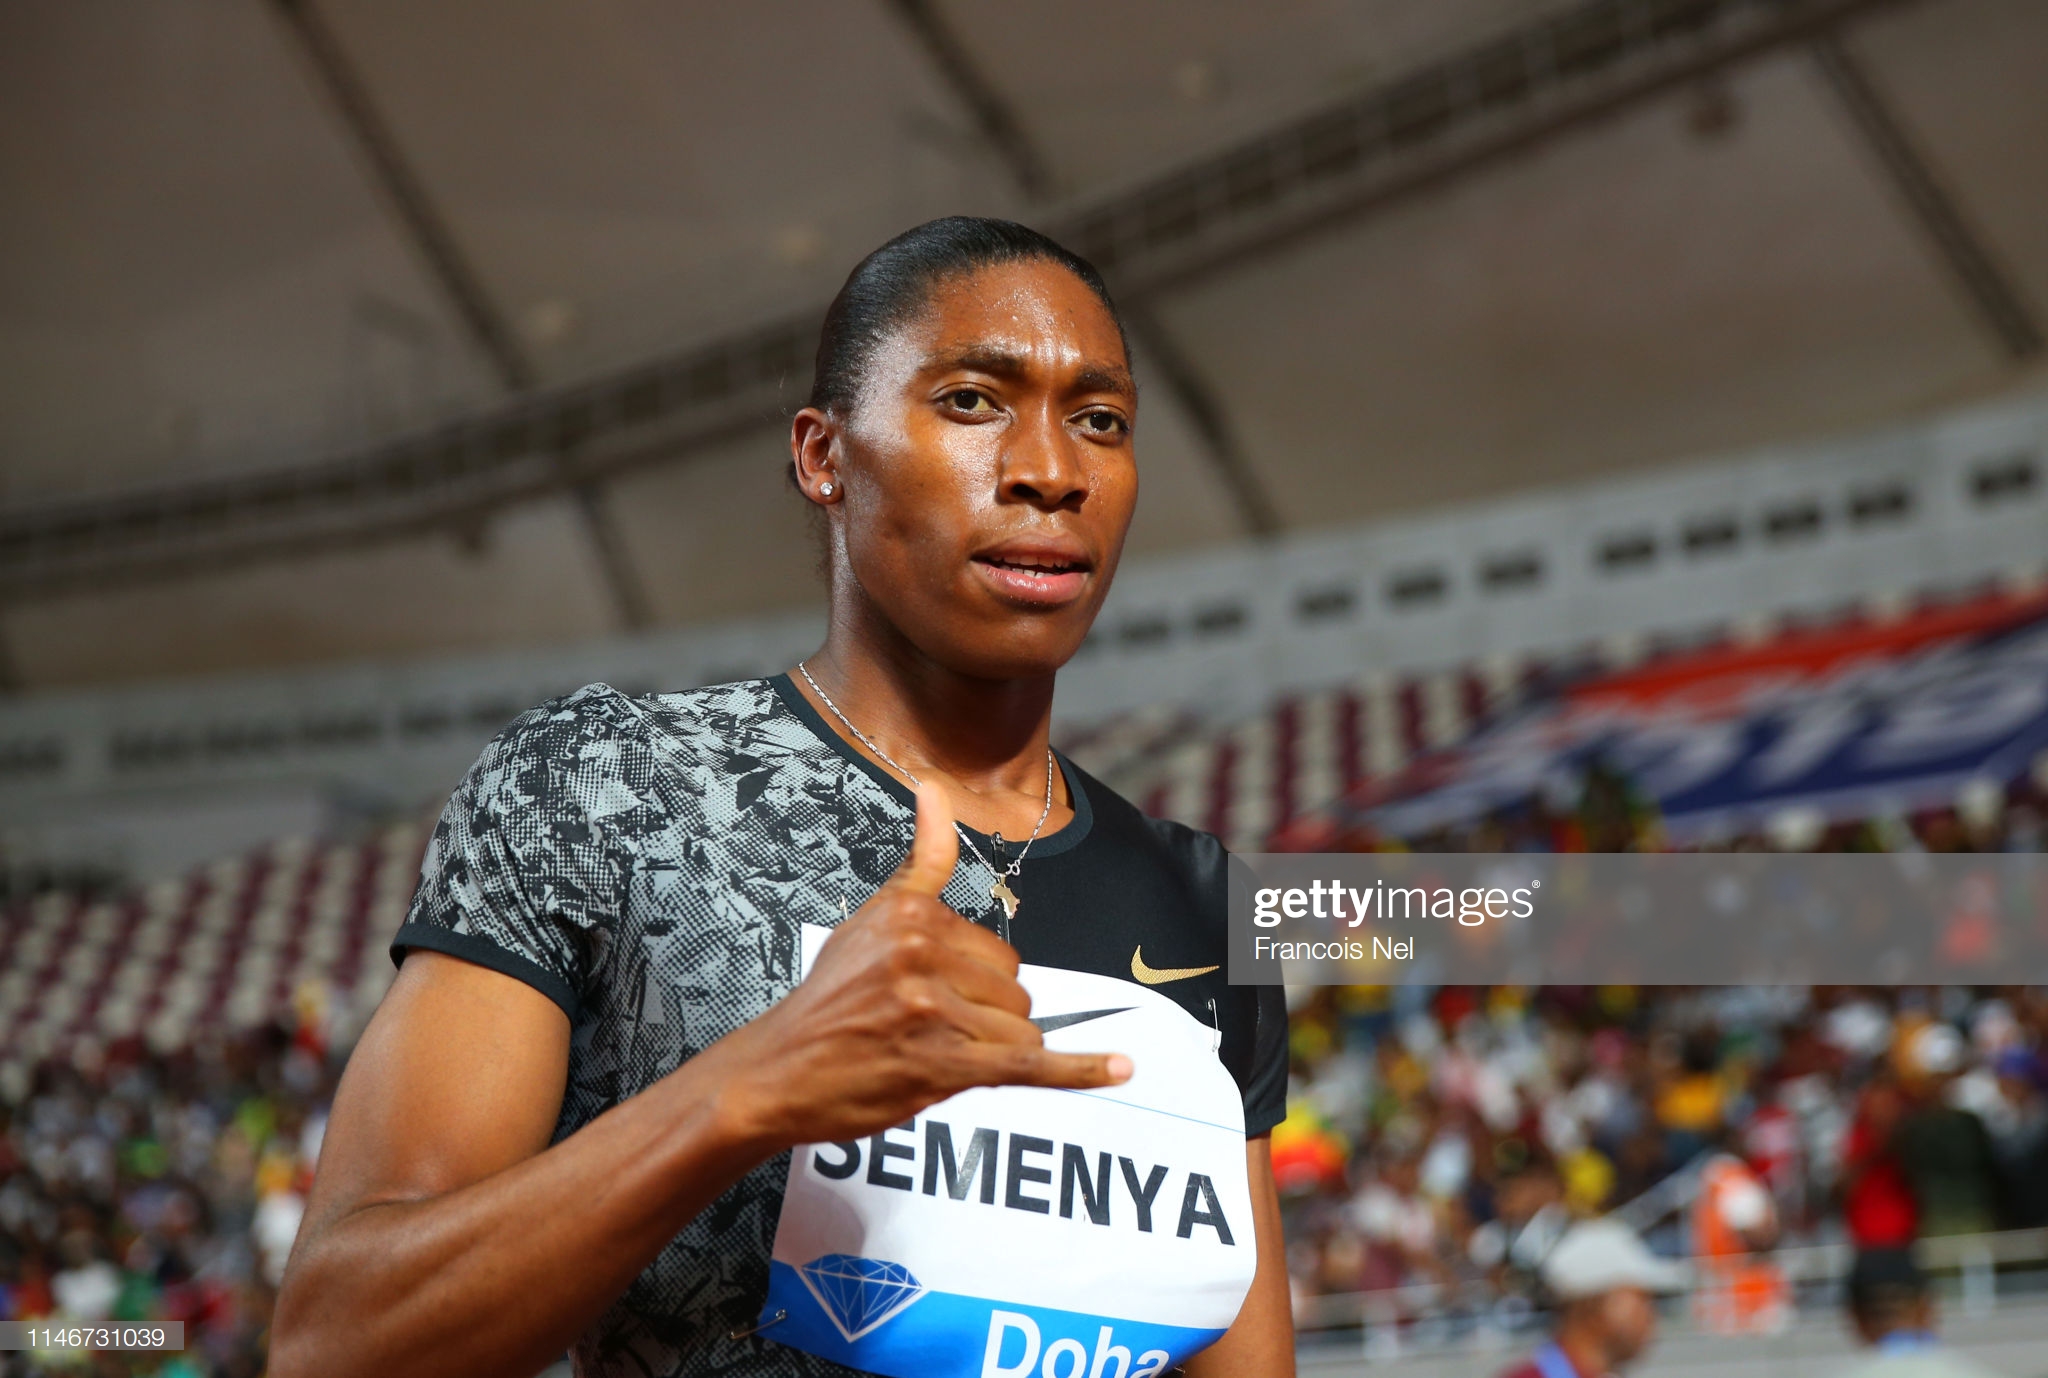 DOHA, QATAR - MAY 03:  Caster Semenya of South Africa celebrates winning the Women's 800 metres during the IAAF Diamond League event at the Khalifa International Stadium on May 03, 2019 in Doha, Qatar. (Photo by Francois Nel/Getty Images)